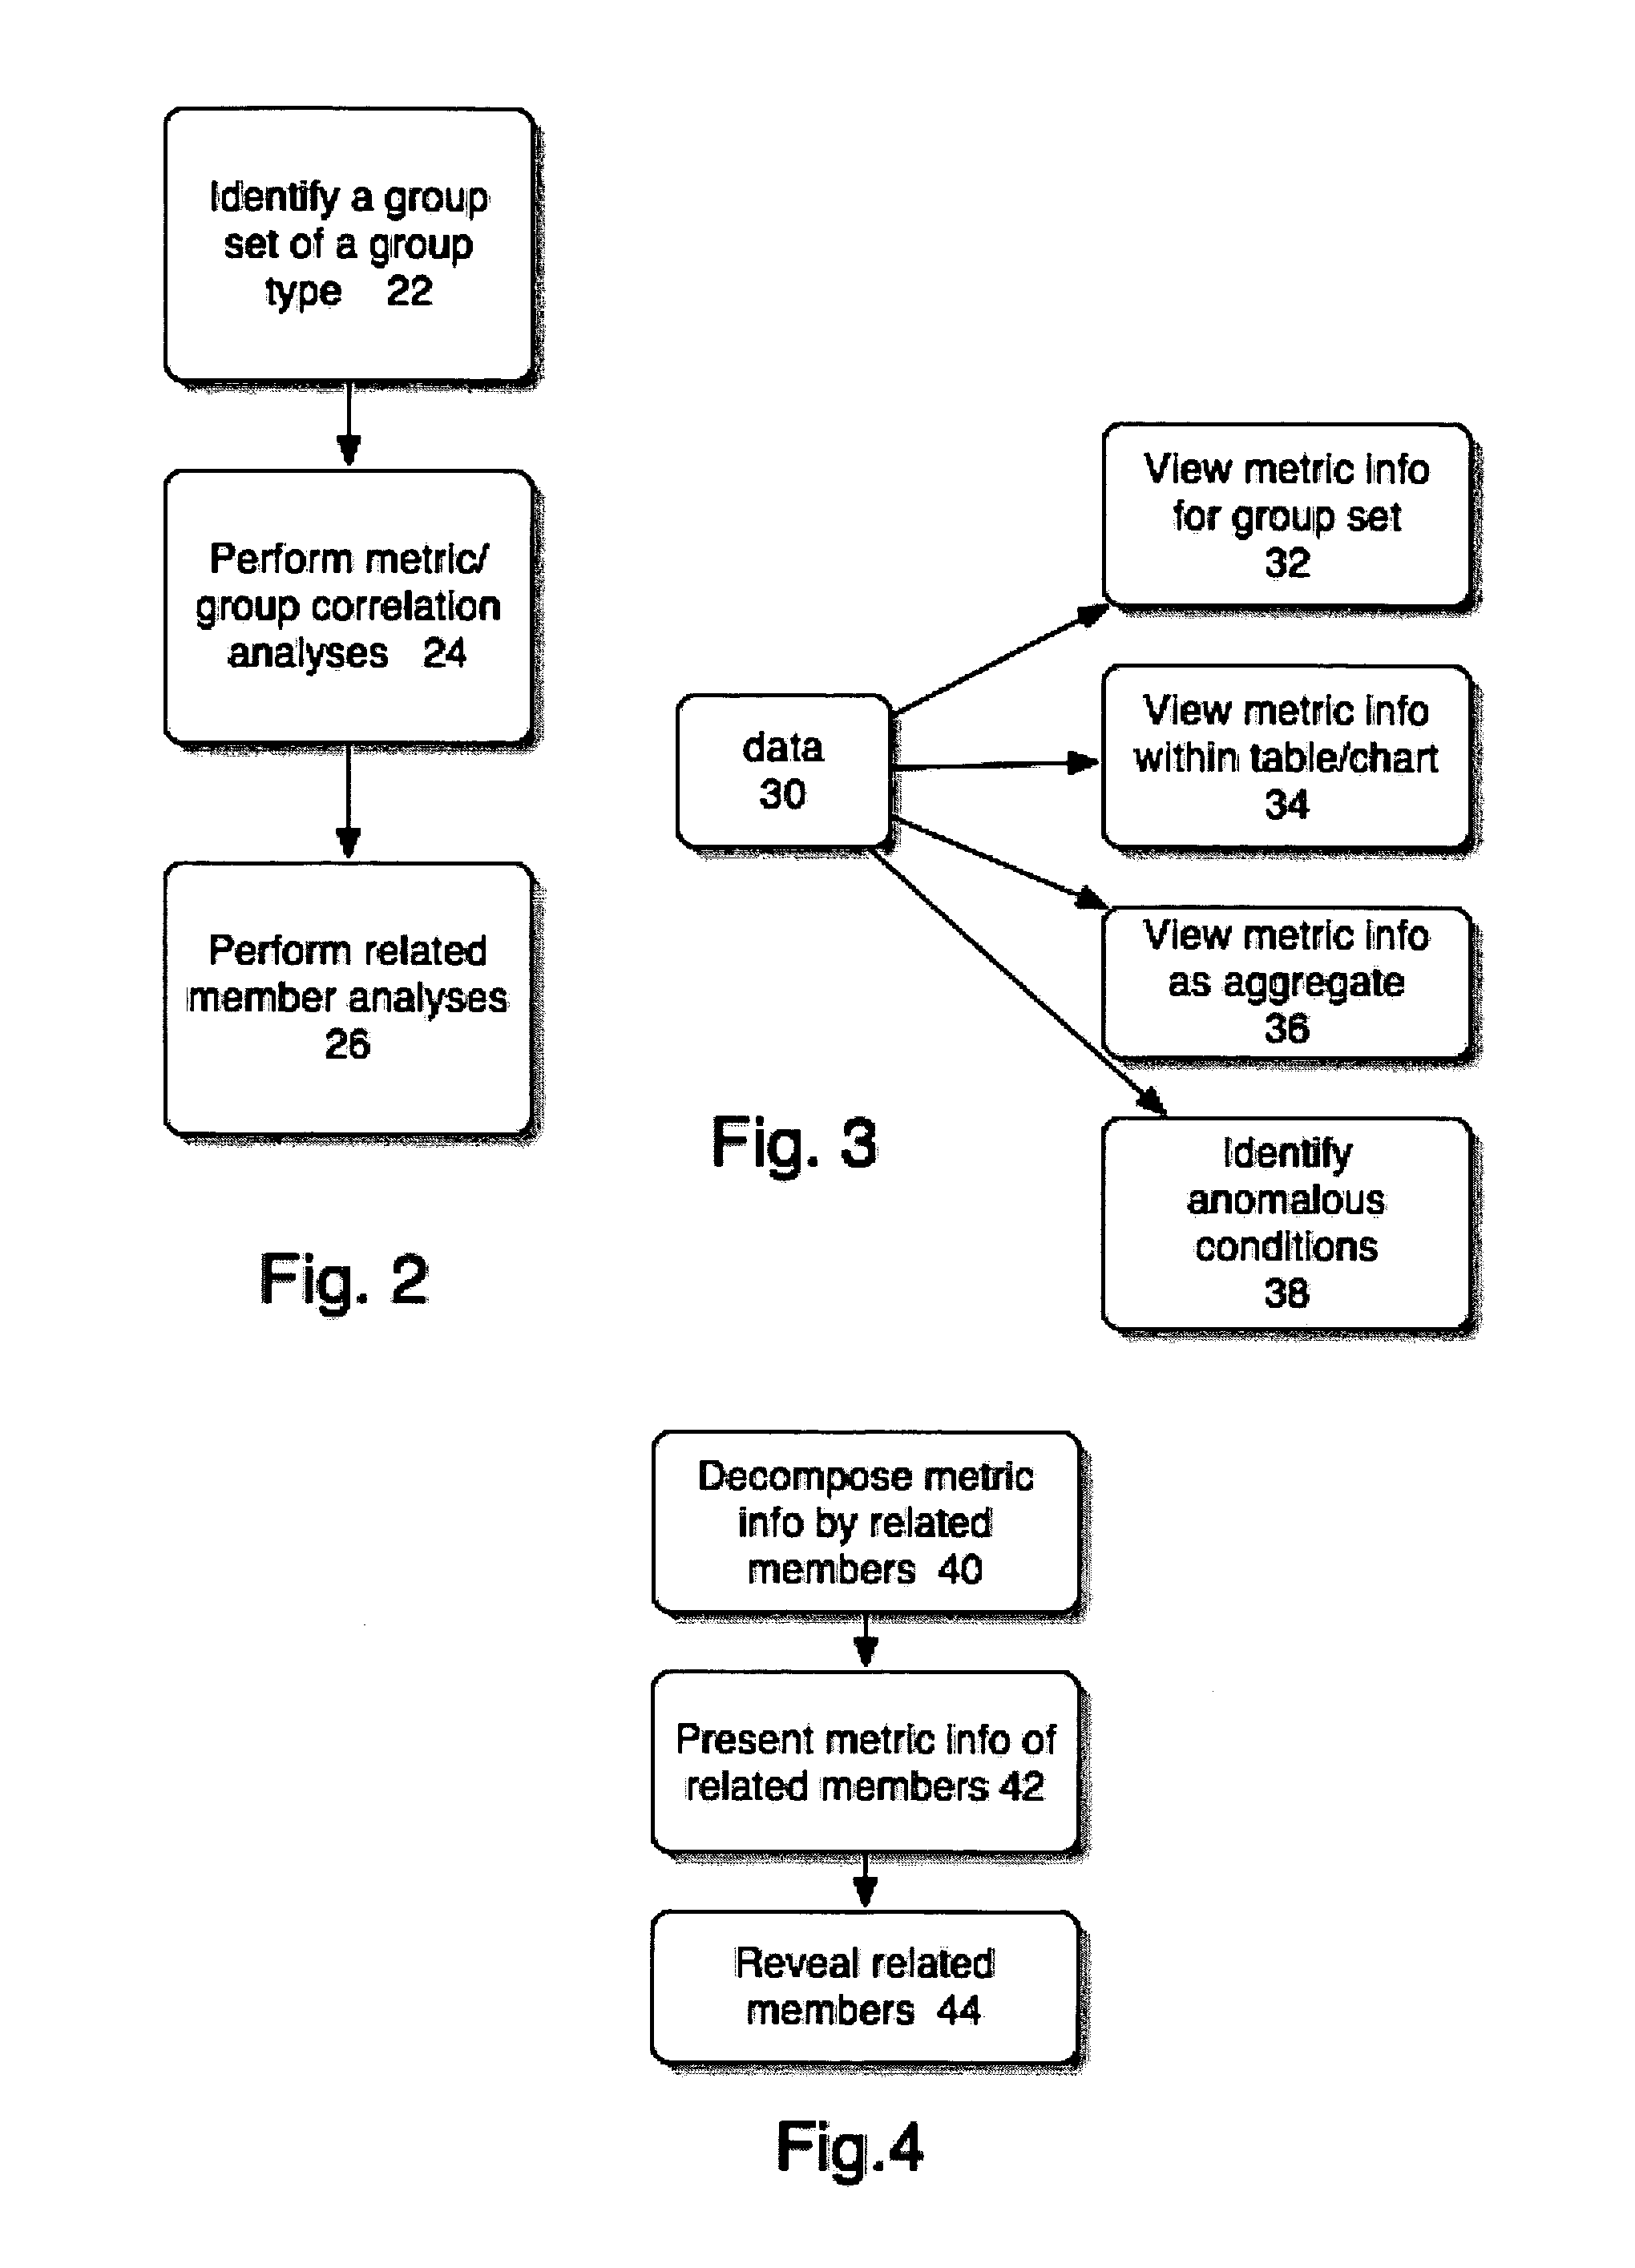 Method for discovery and troubleshooting of network application usage and performance issues